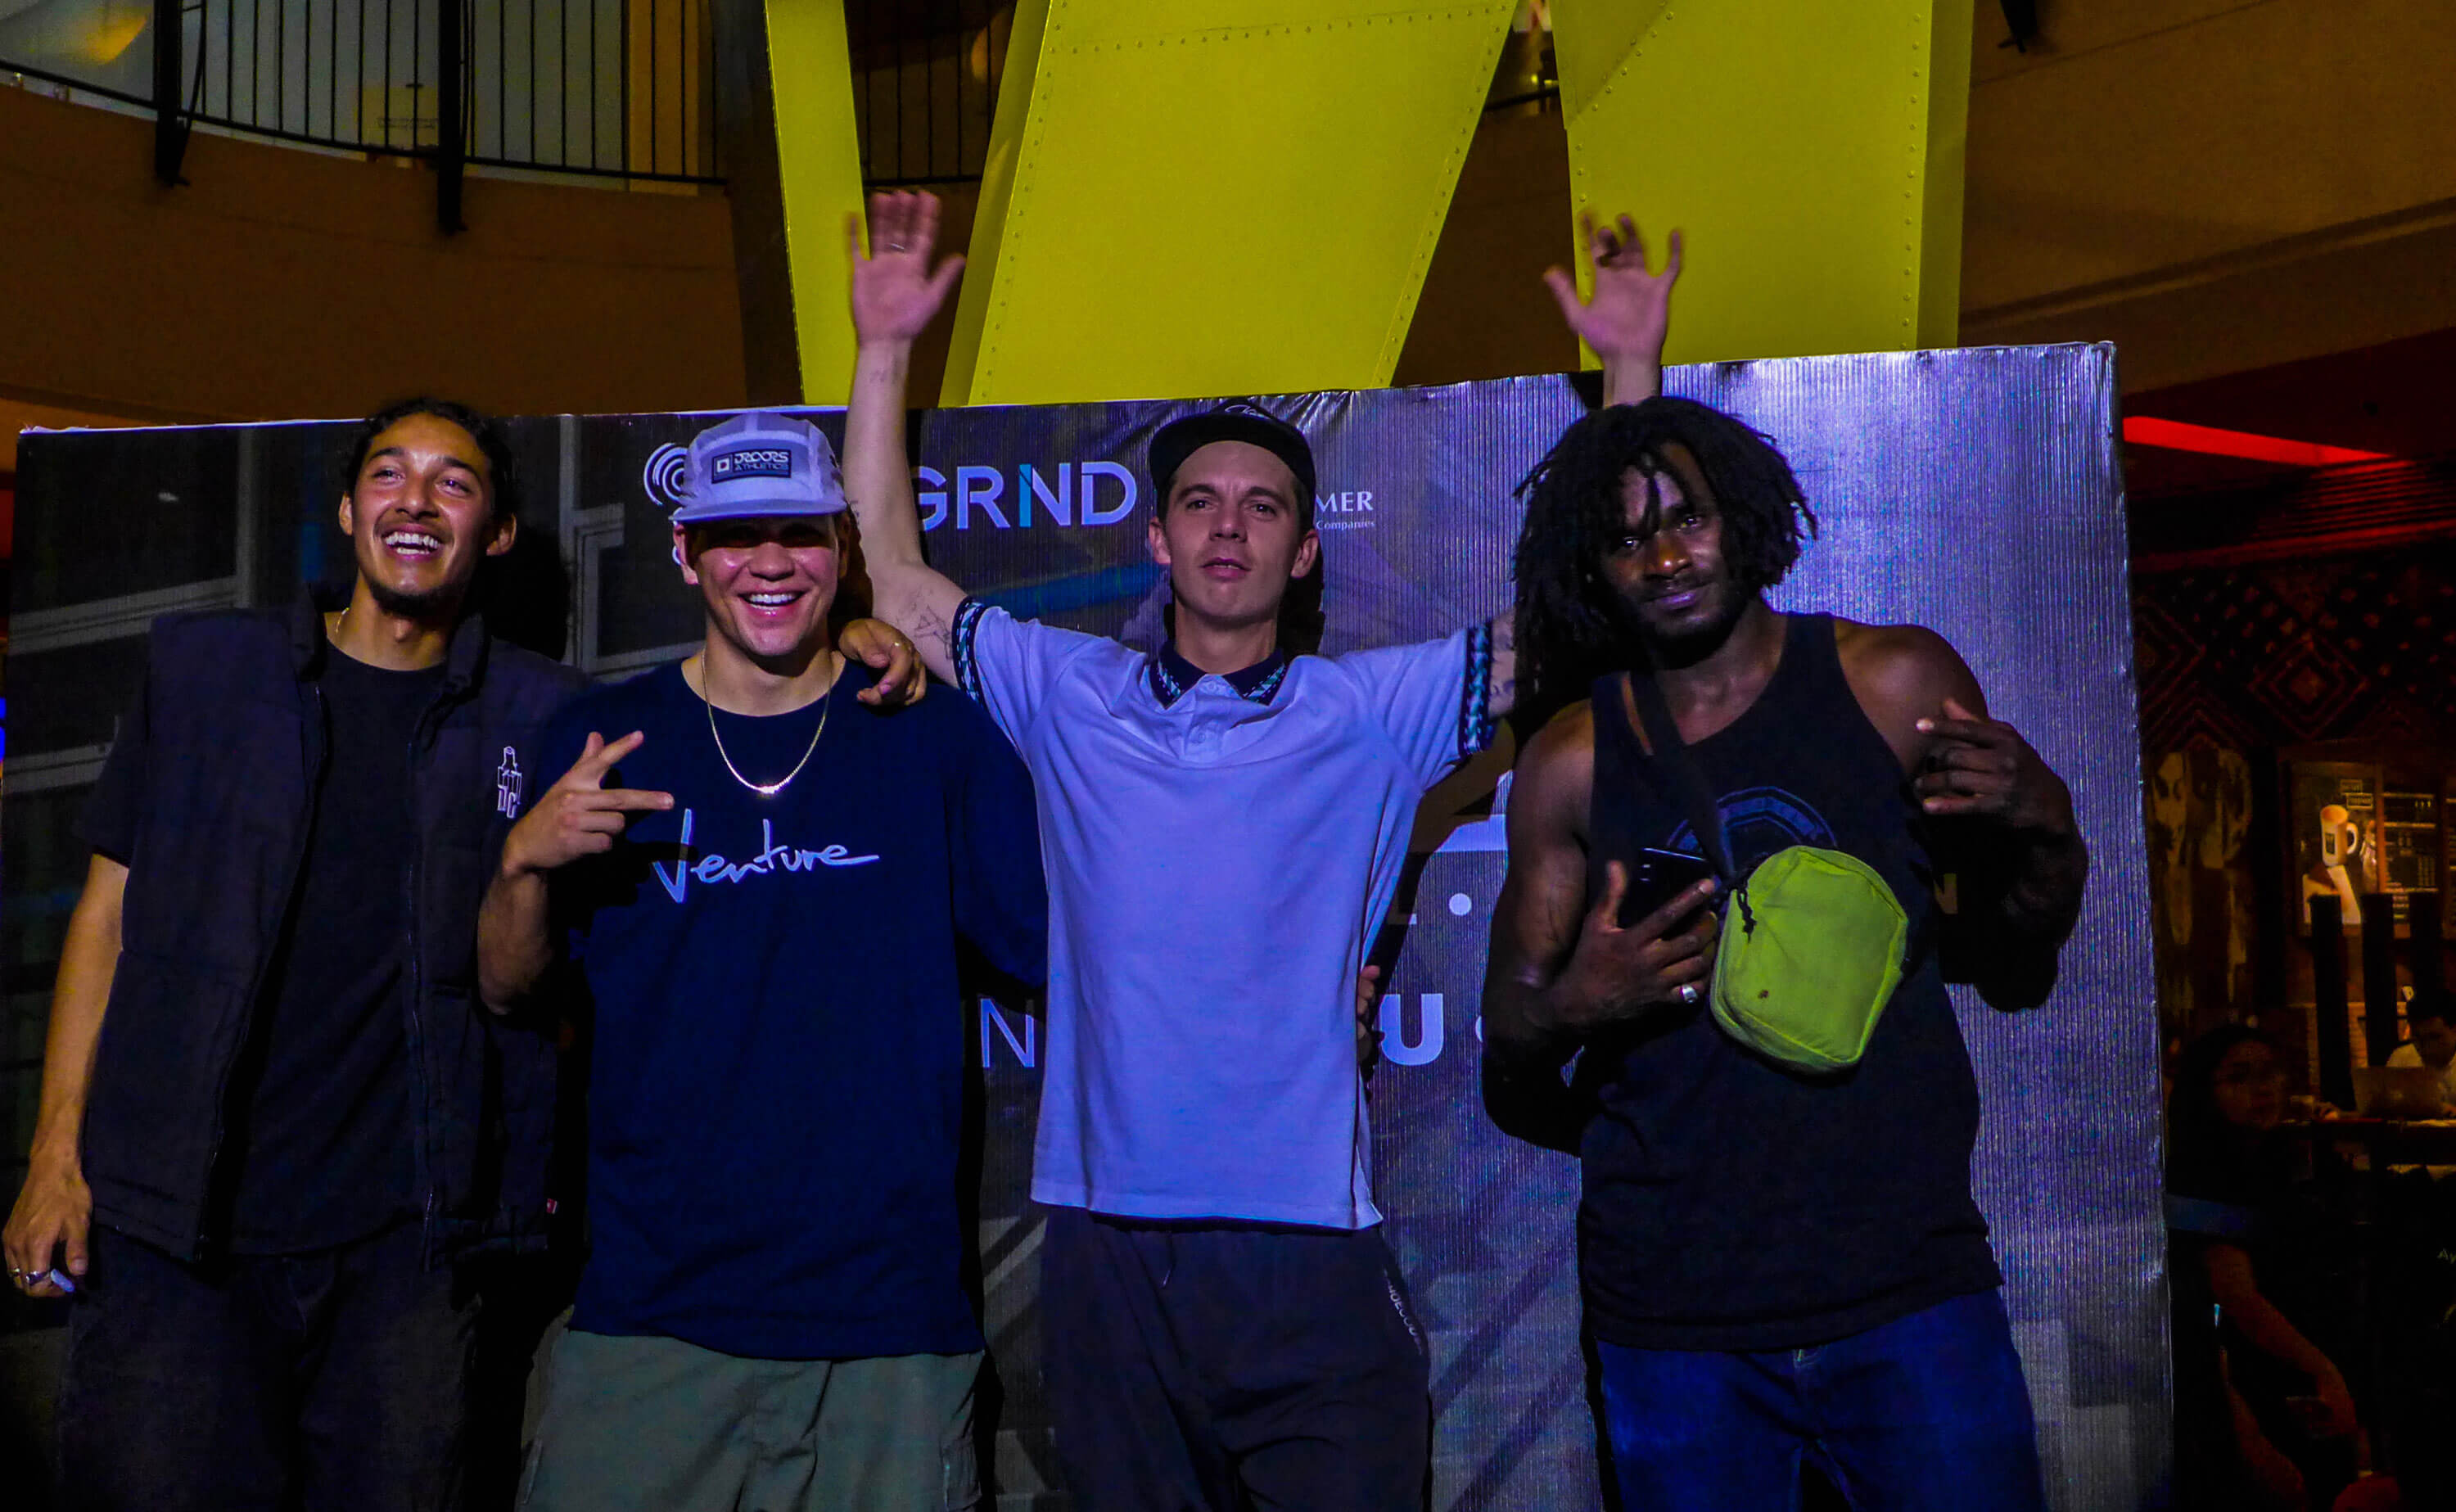 DC GOSKATEBOARDING DAY. (From left) Alexis Ramirez, Shaun Paul, Alex Lawton, and Cyril Jackson during the Meet and Greet event at the Ayala Center Cebu.